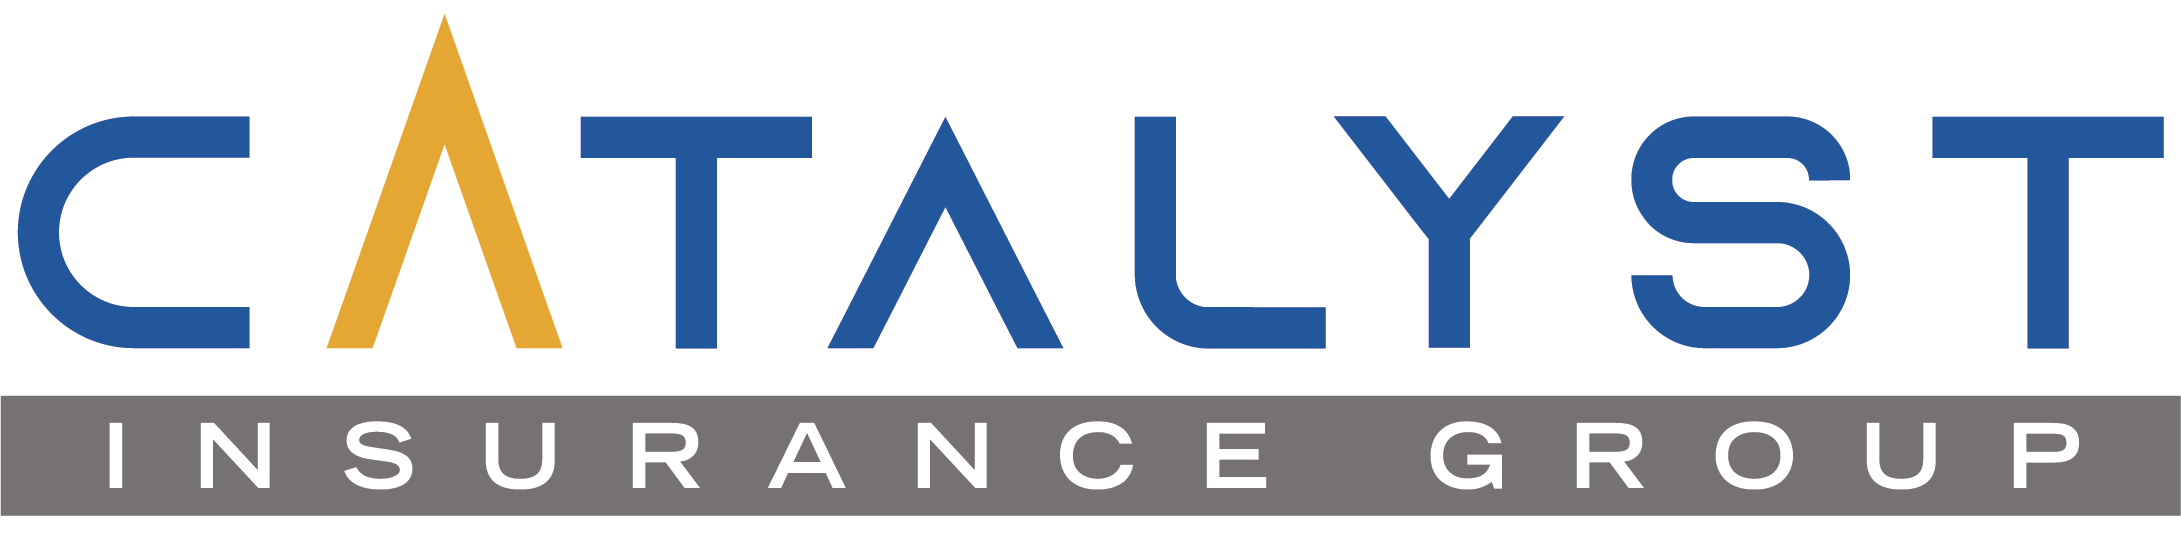 Catalyst Insurance Group